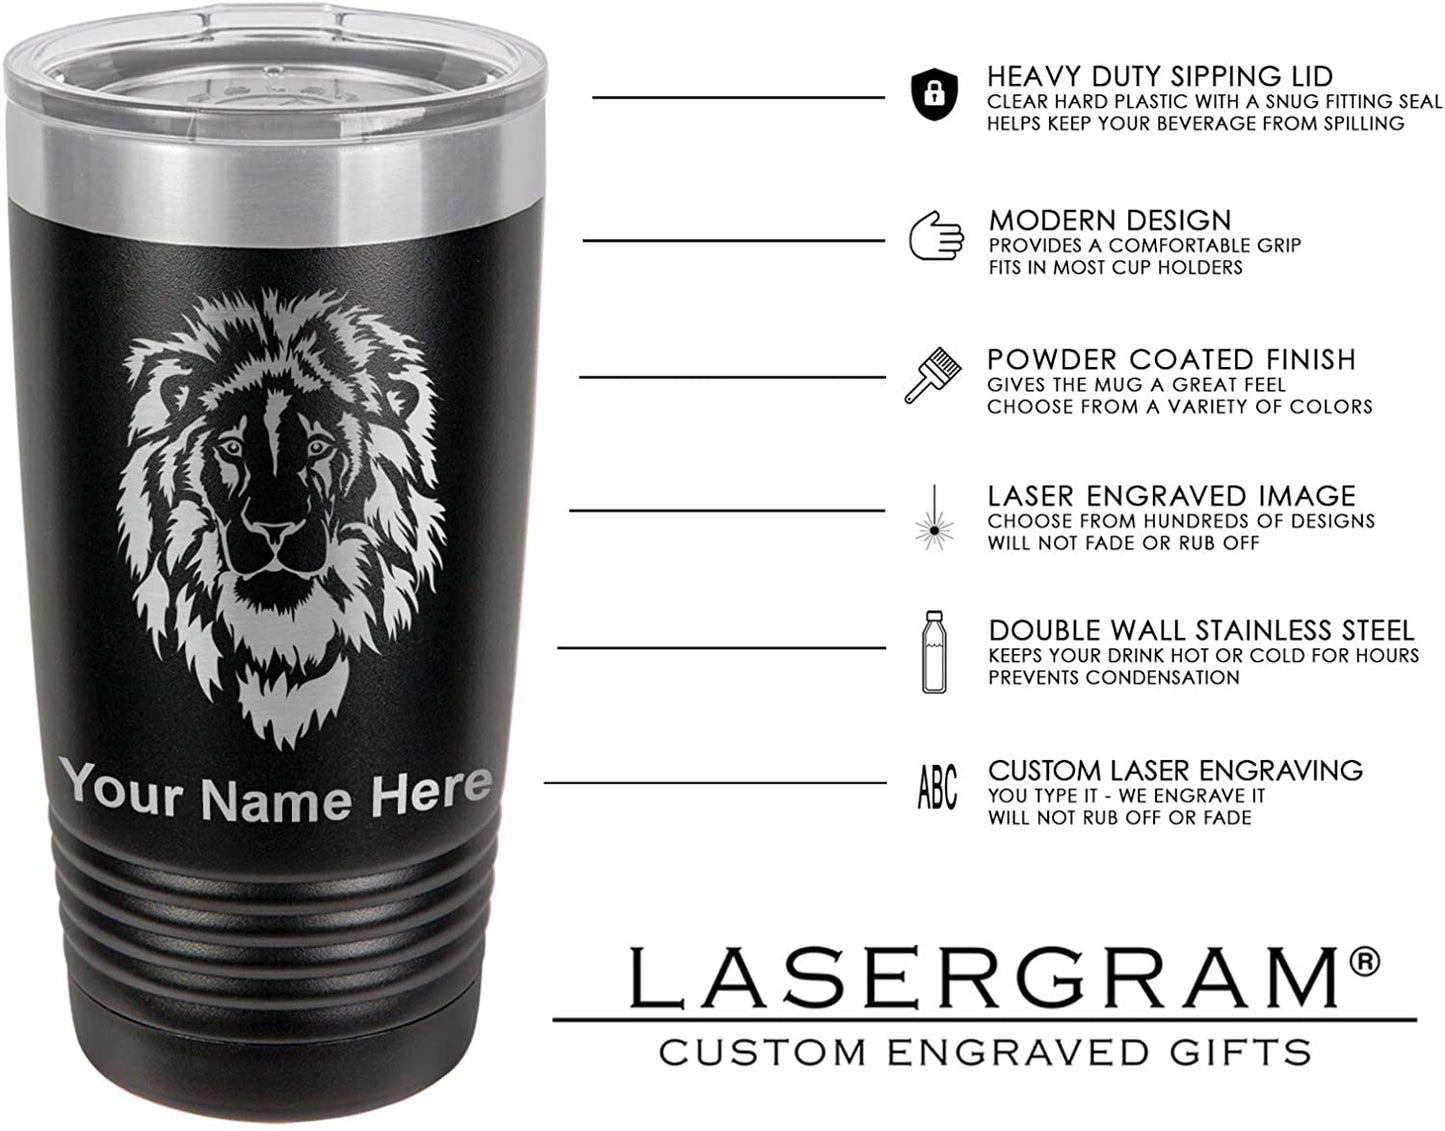 20oz Vacuum Insulated Tumbler Mug, World's Greatest Daughter, Personalized Engraving Included